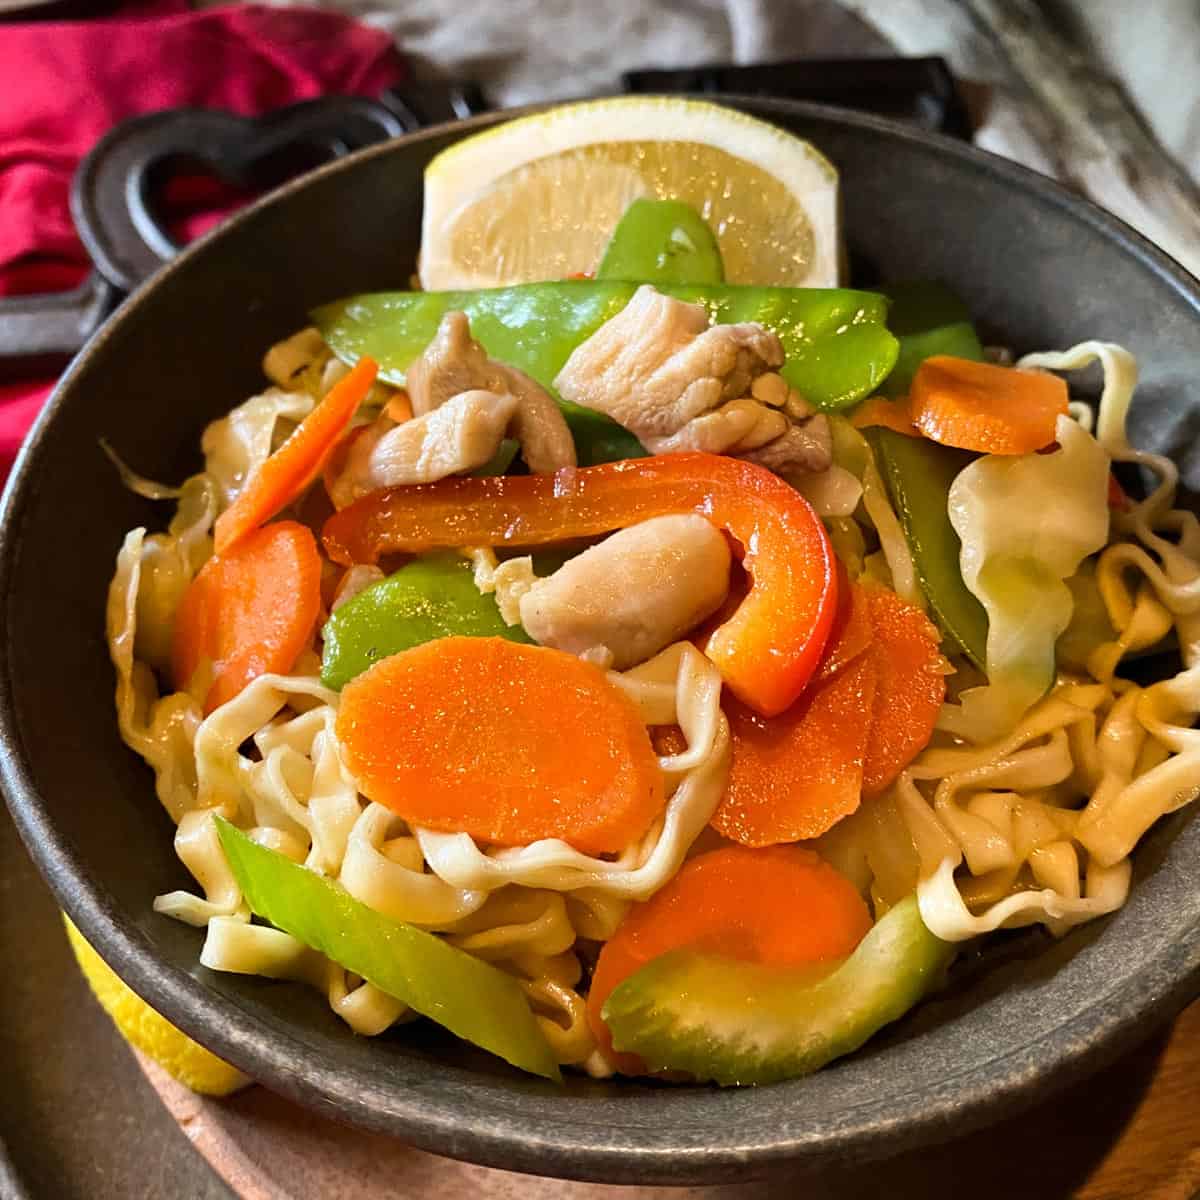 Pancit Guisado egg noodles with chicken bits and vegetables in a bowl.